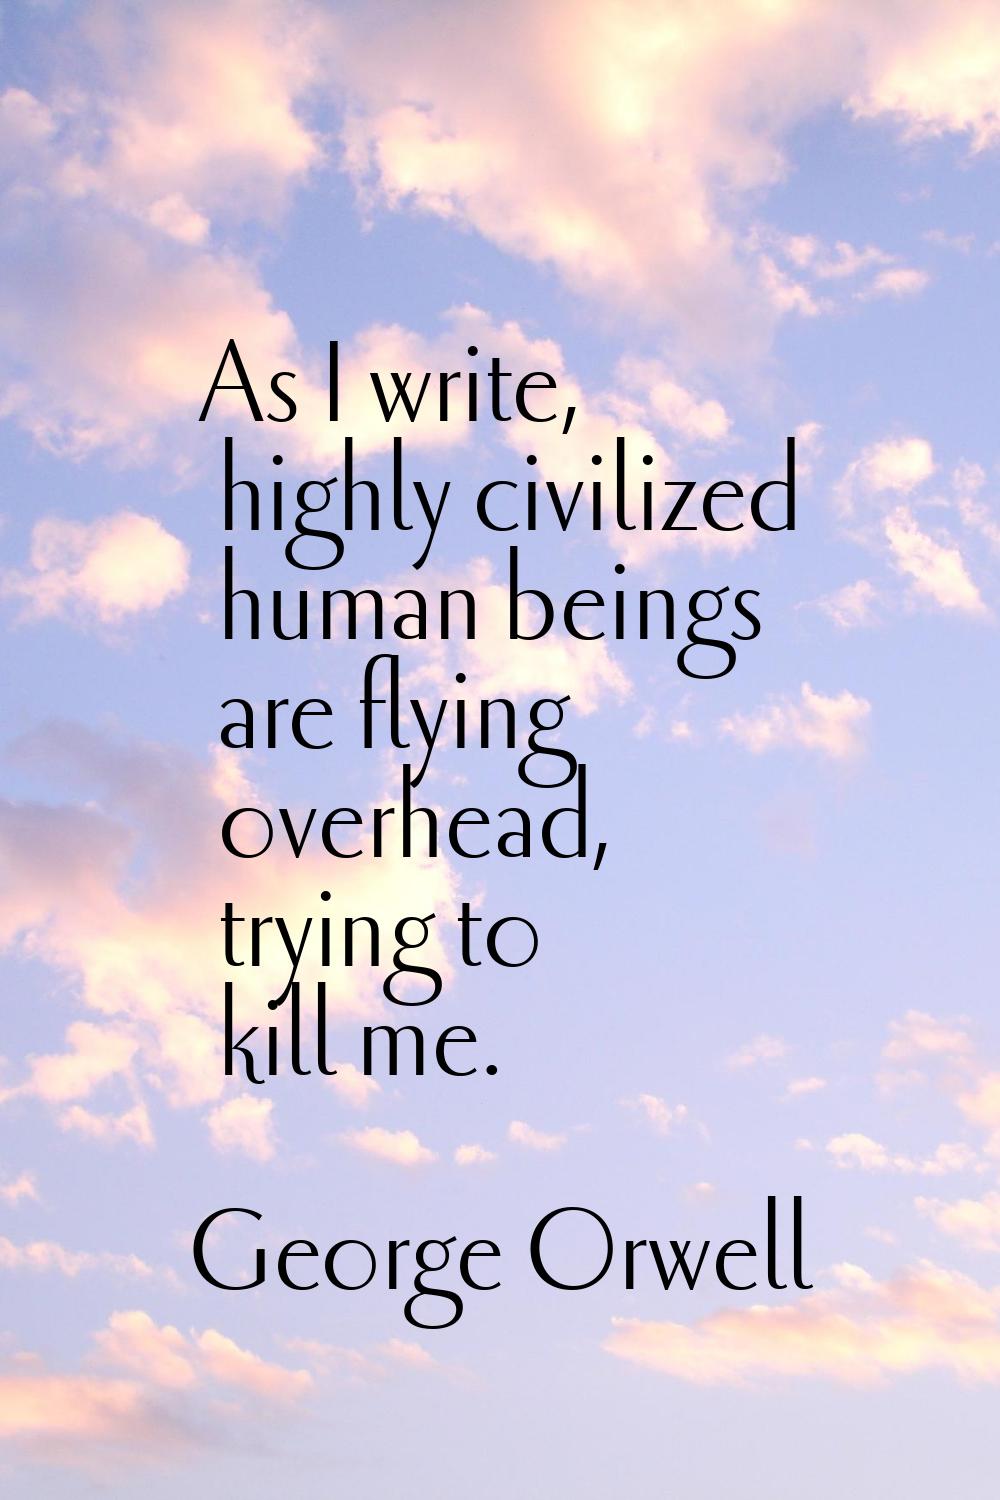 As I write, highly civilized human beings are flying overhead, trying to kill me.